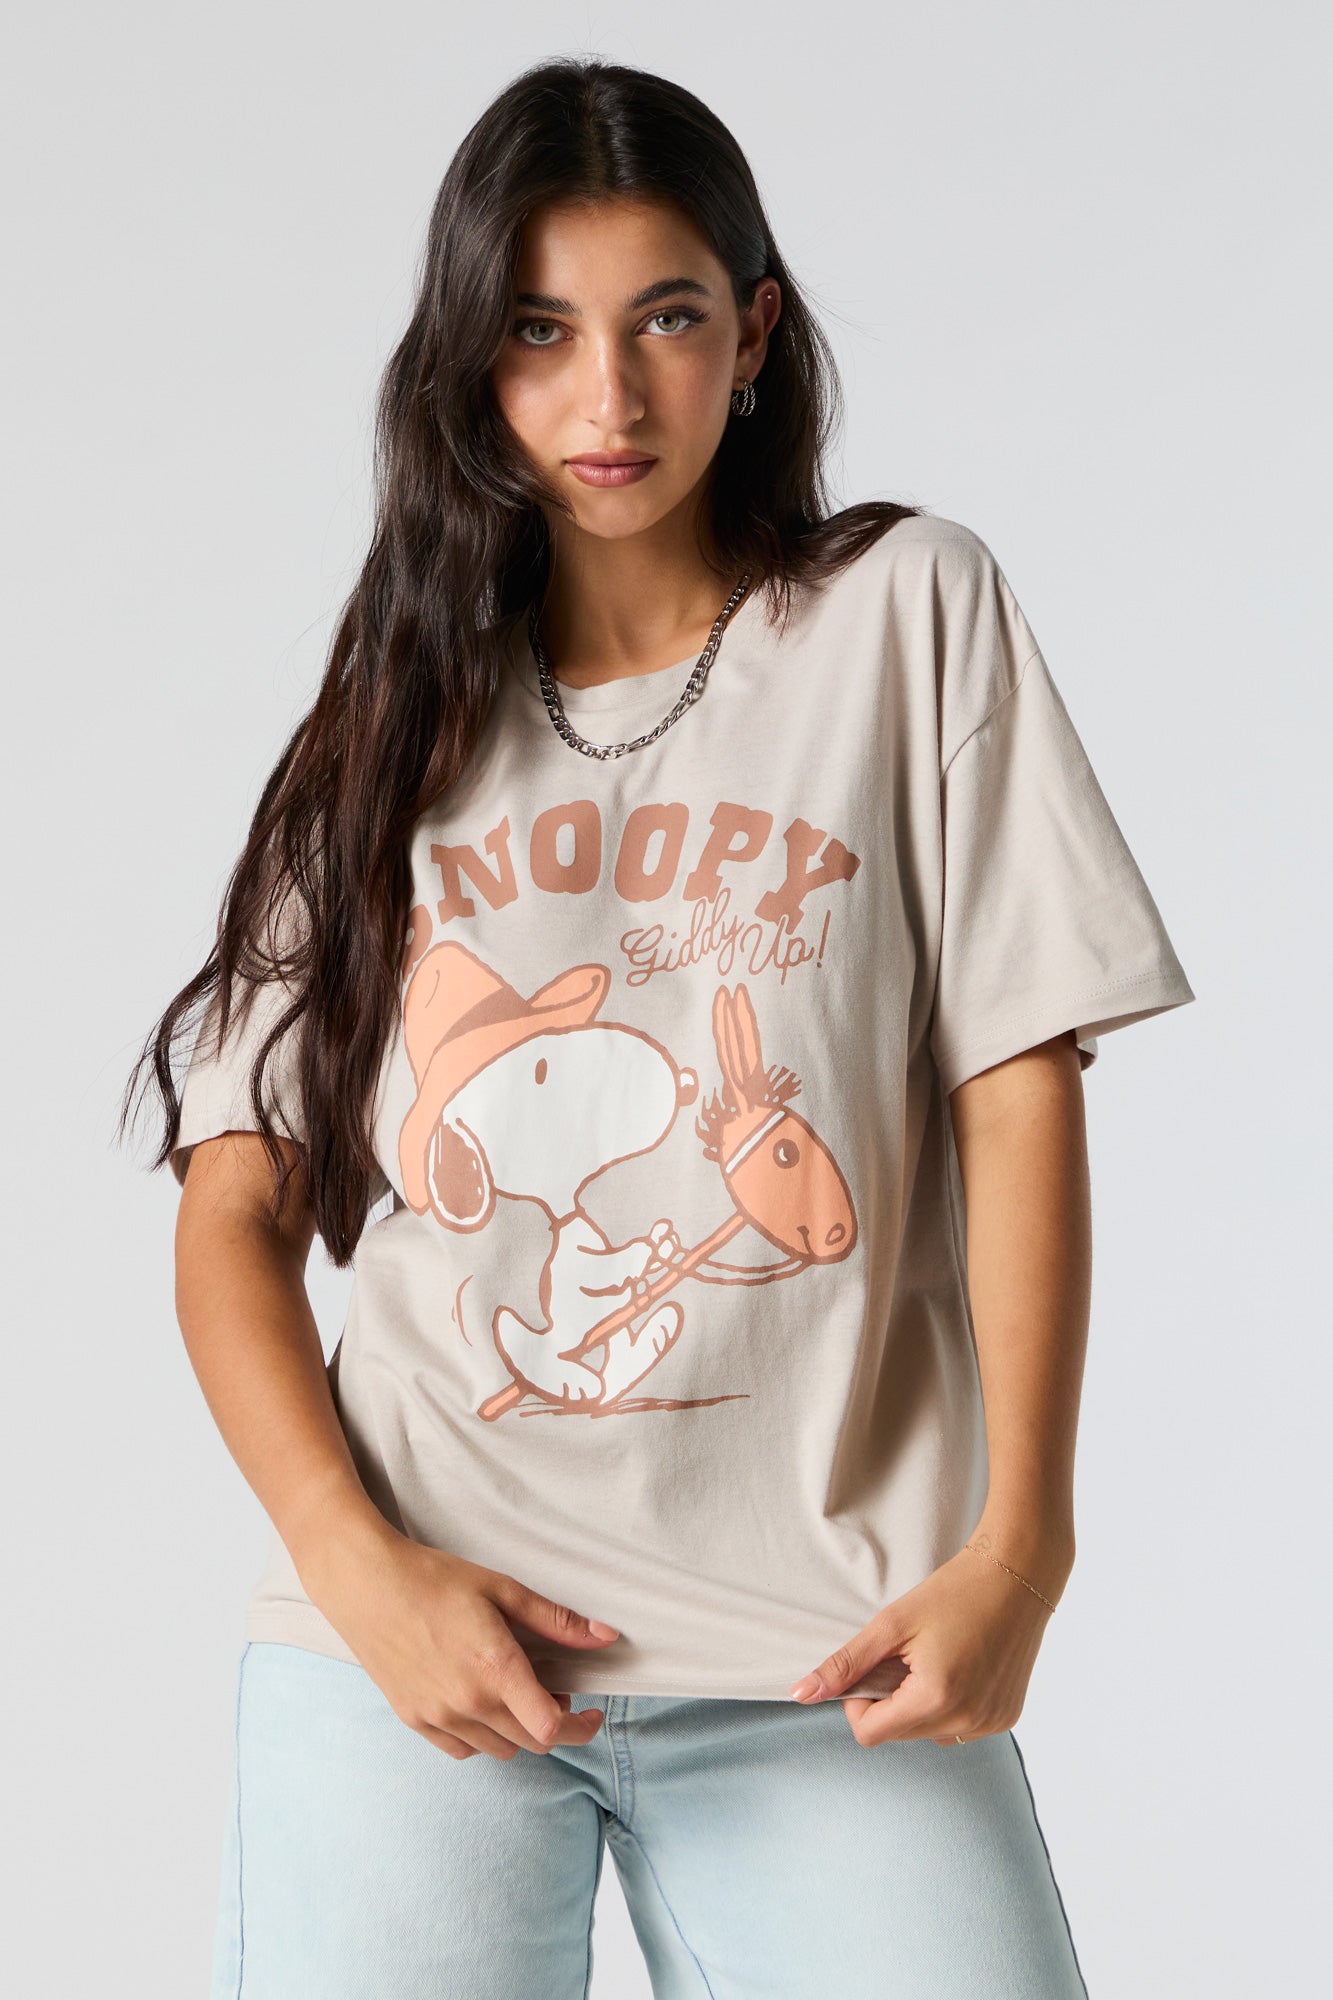 Snoopy Giddy Up Graphic Boyfriend T-Shirt